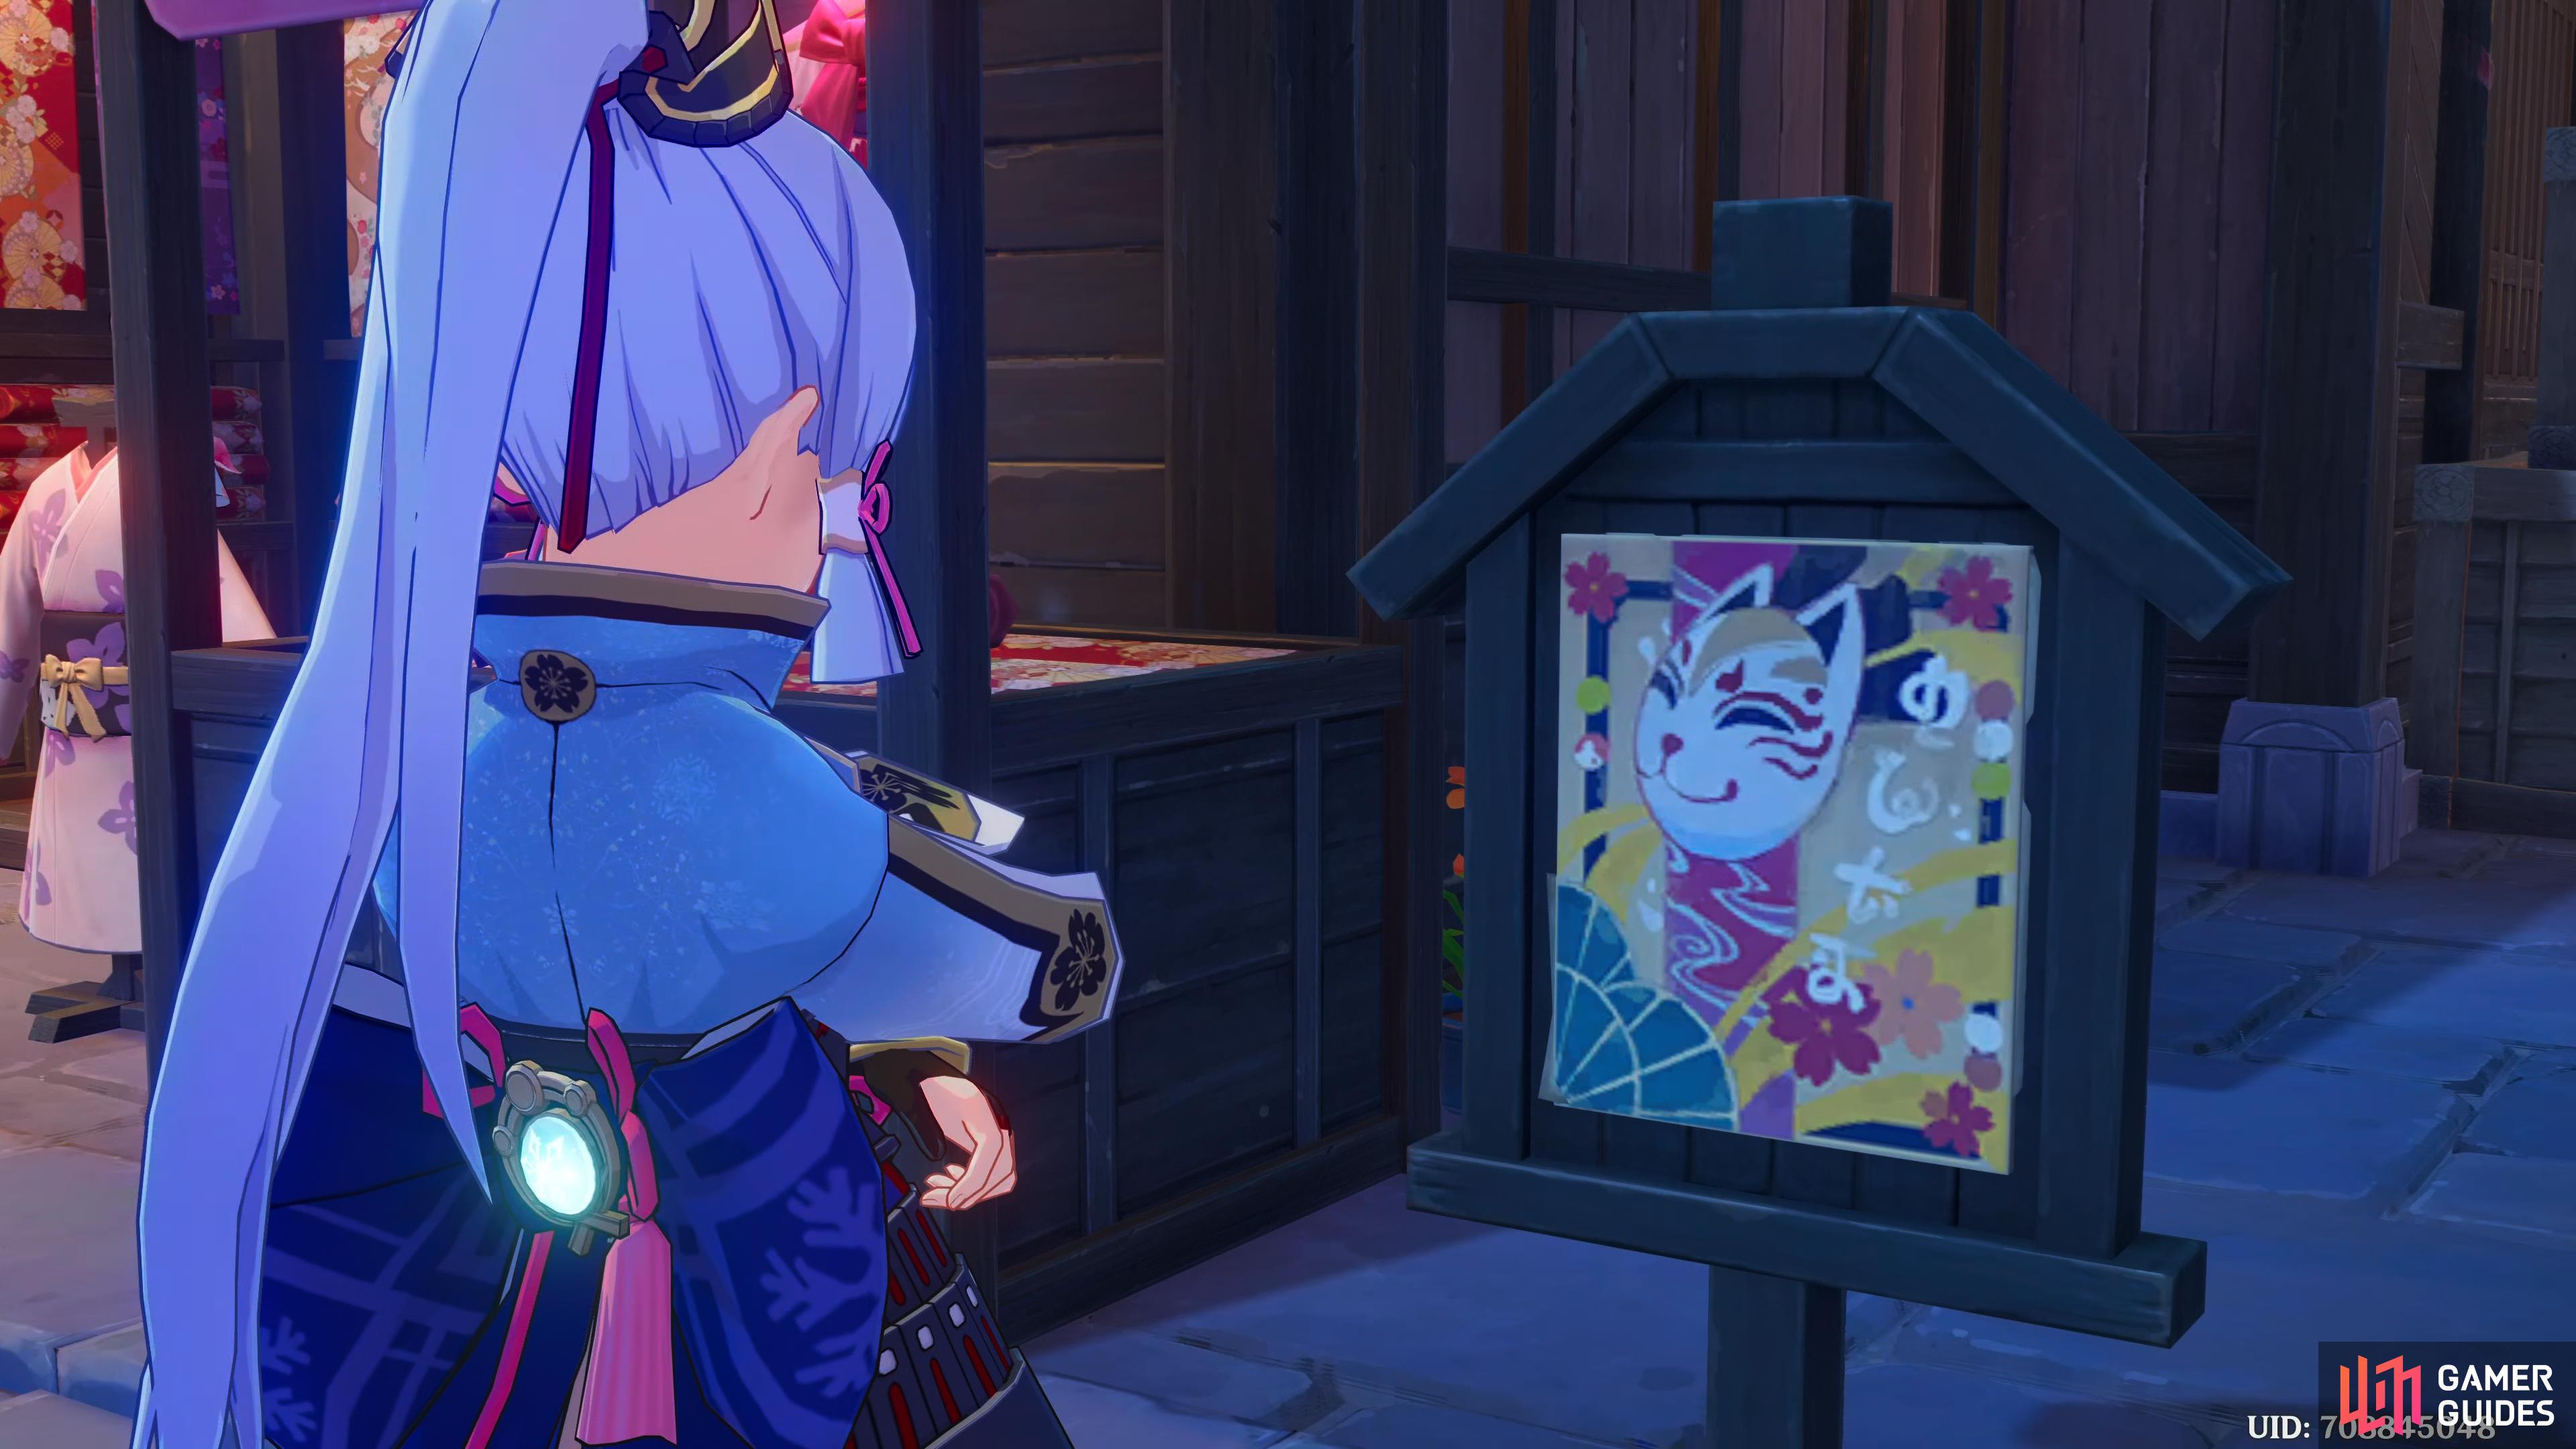 Ayaka is looking at the promotion poster outside Ogura Textiles and Kimonos.